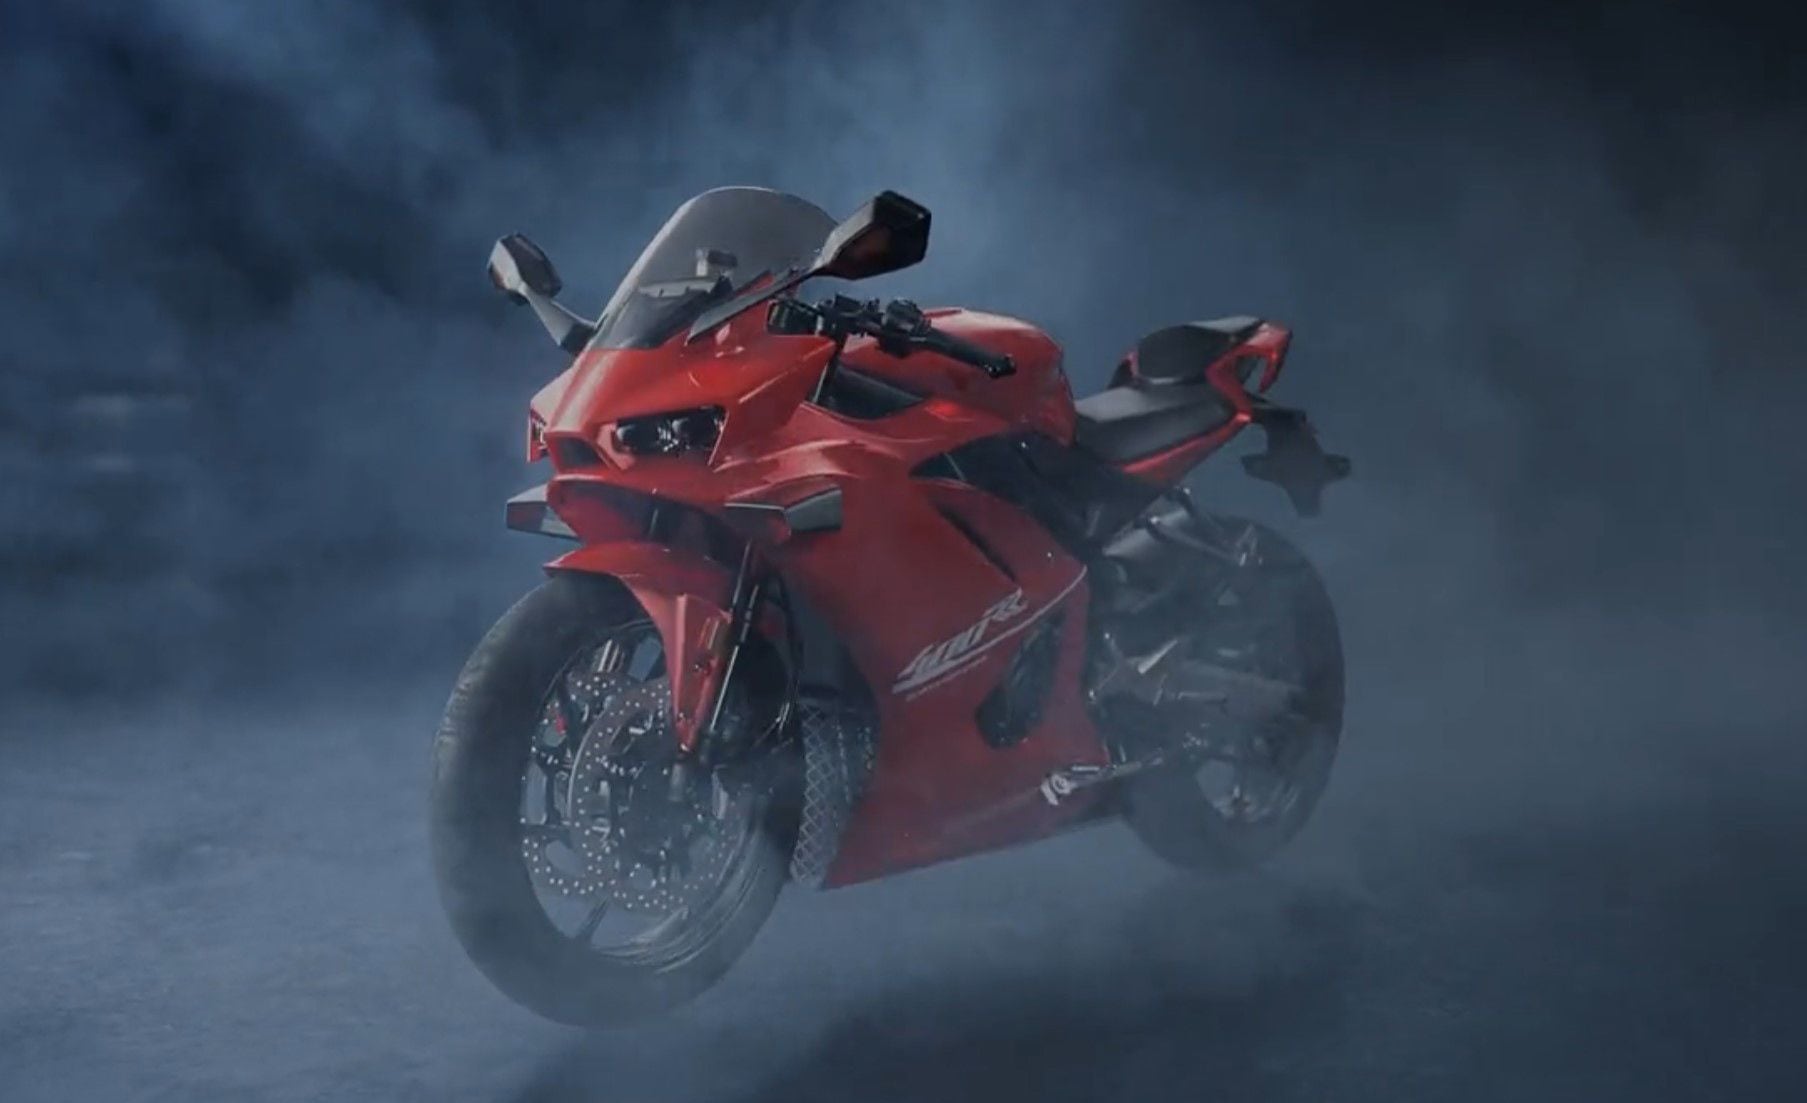 A static image of the soon-to-be-released 400RR.